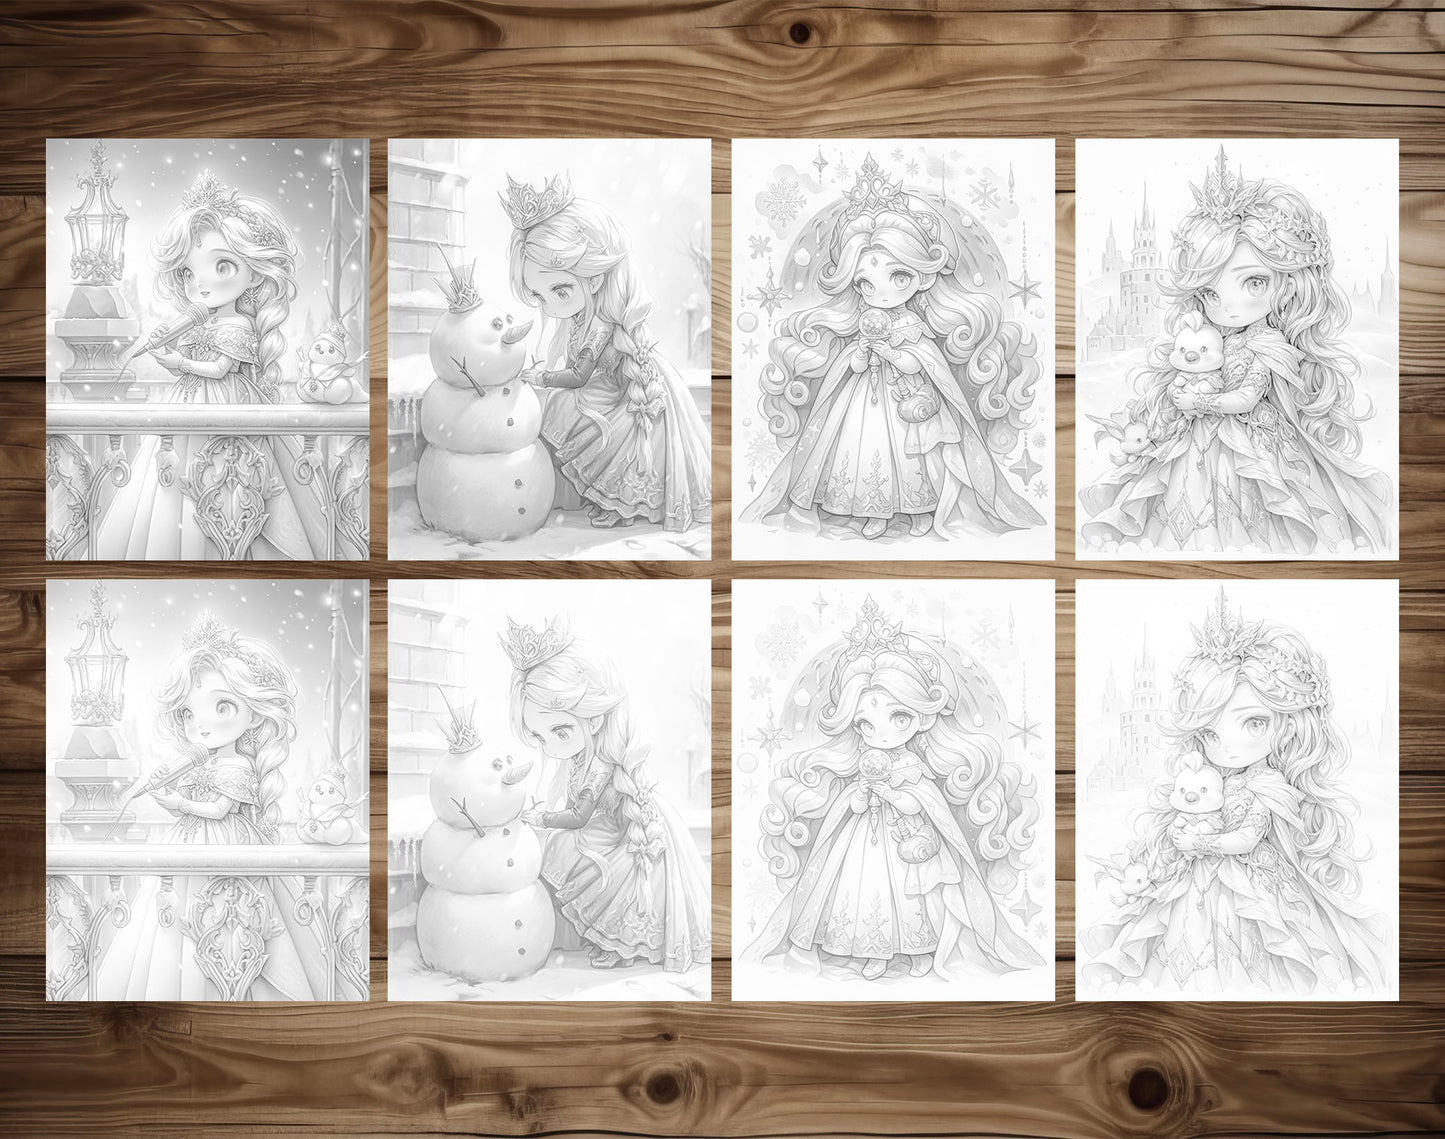 50 Winter Of The Little Princess Grayscale Coloring Pages - Instant Download - Printable Dark/Light